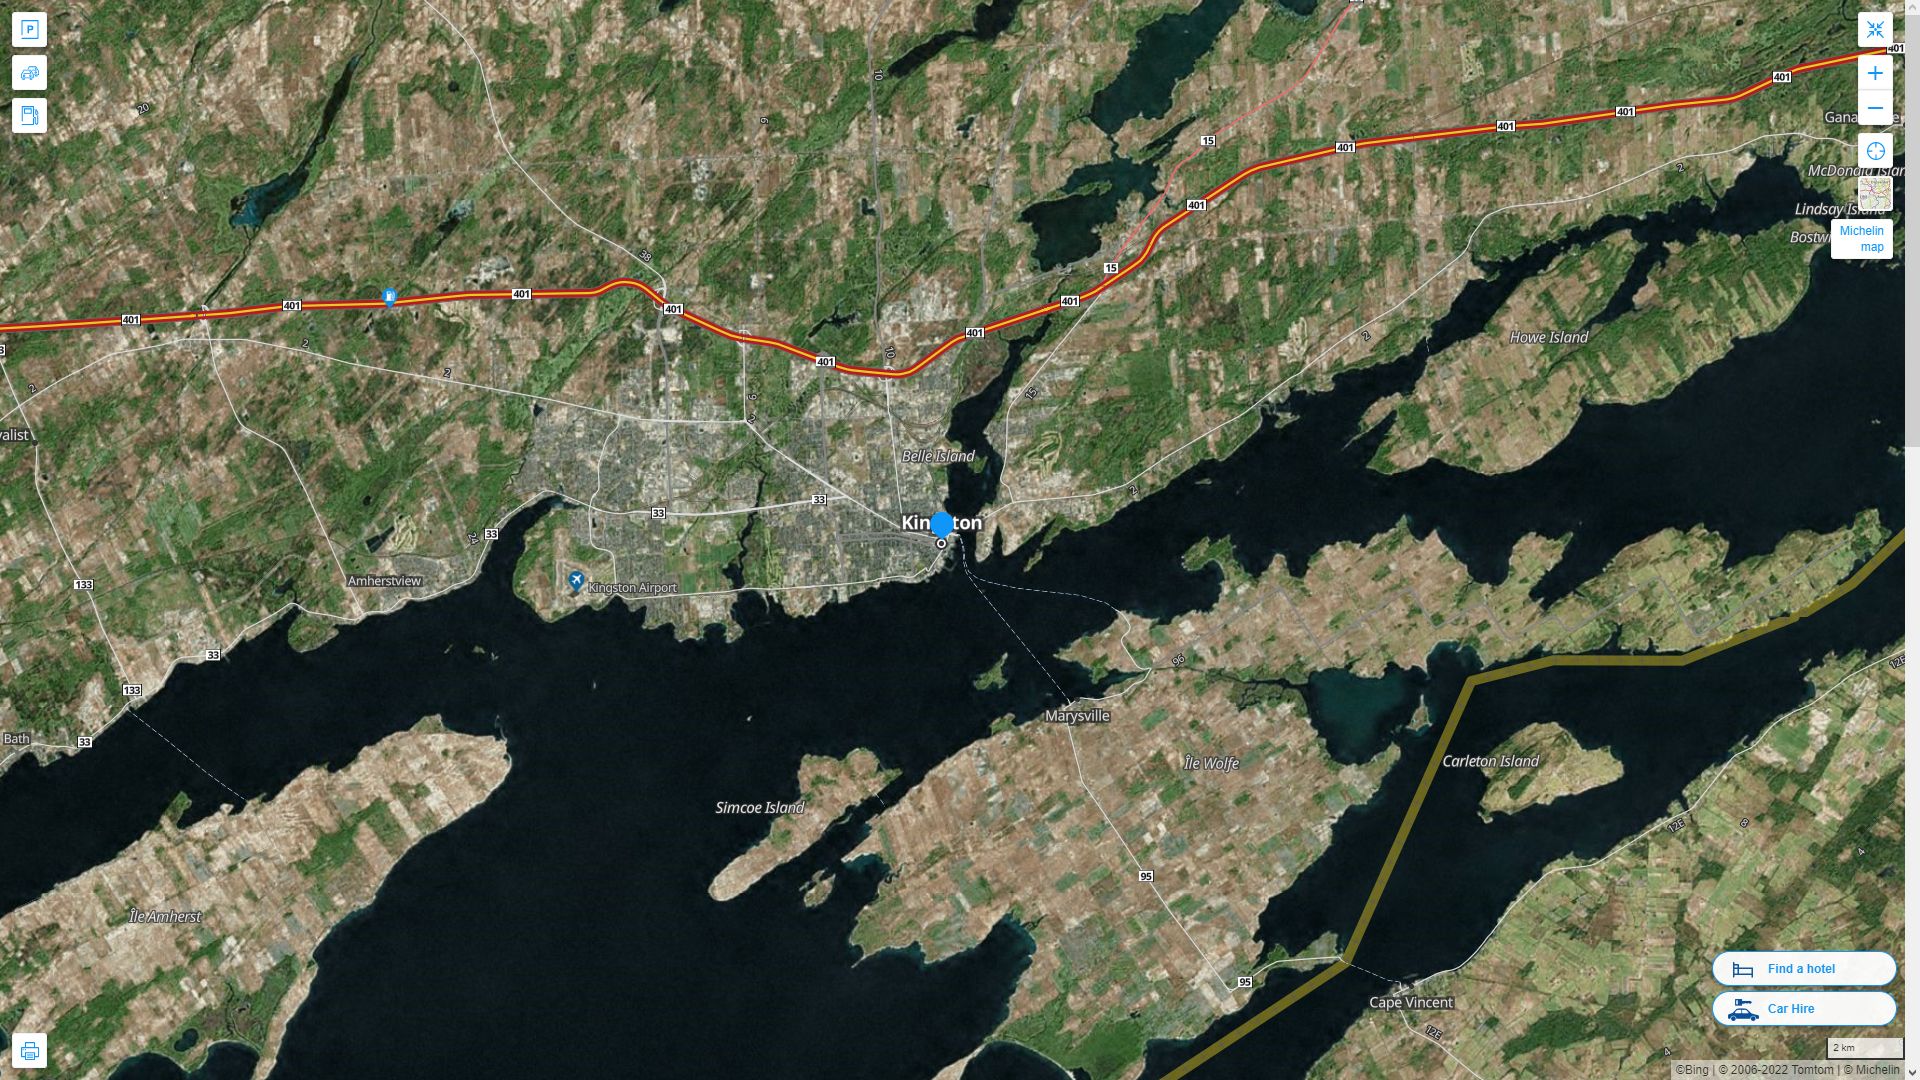 Kingston Highway and Road Map with Satellite View